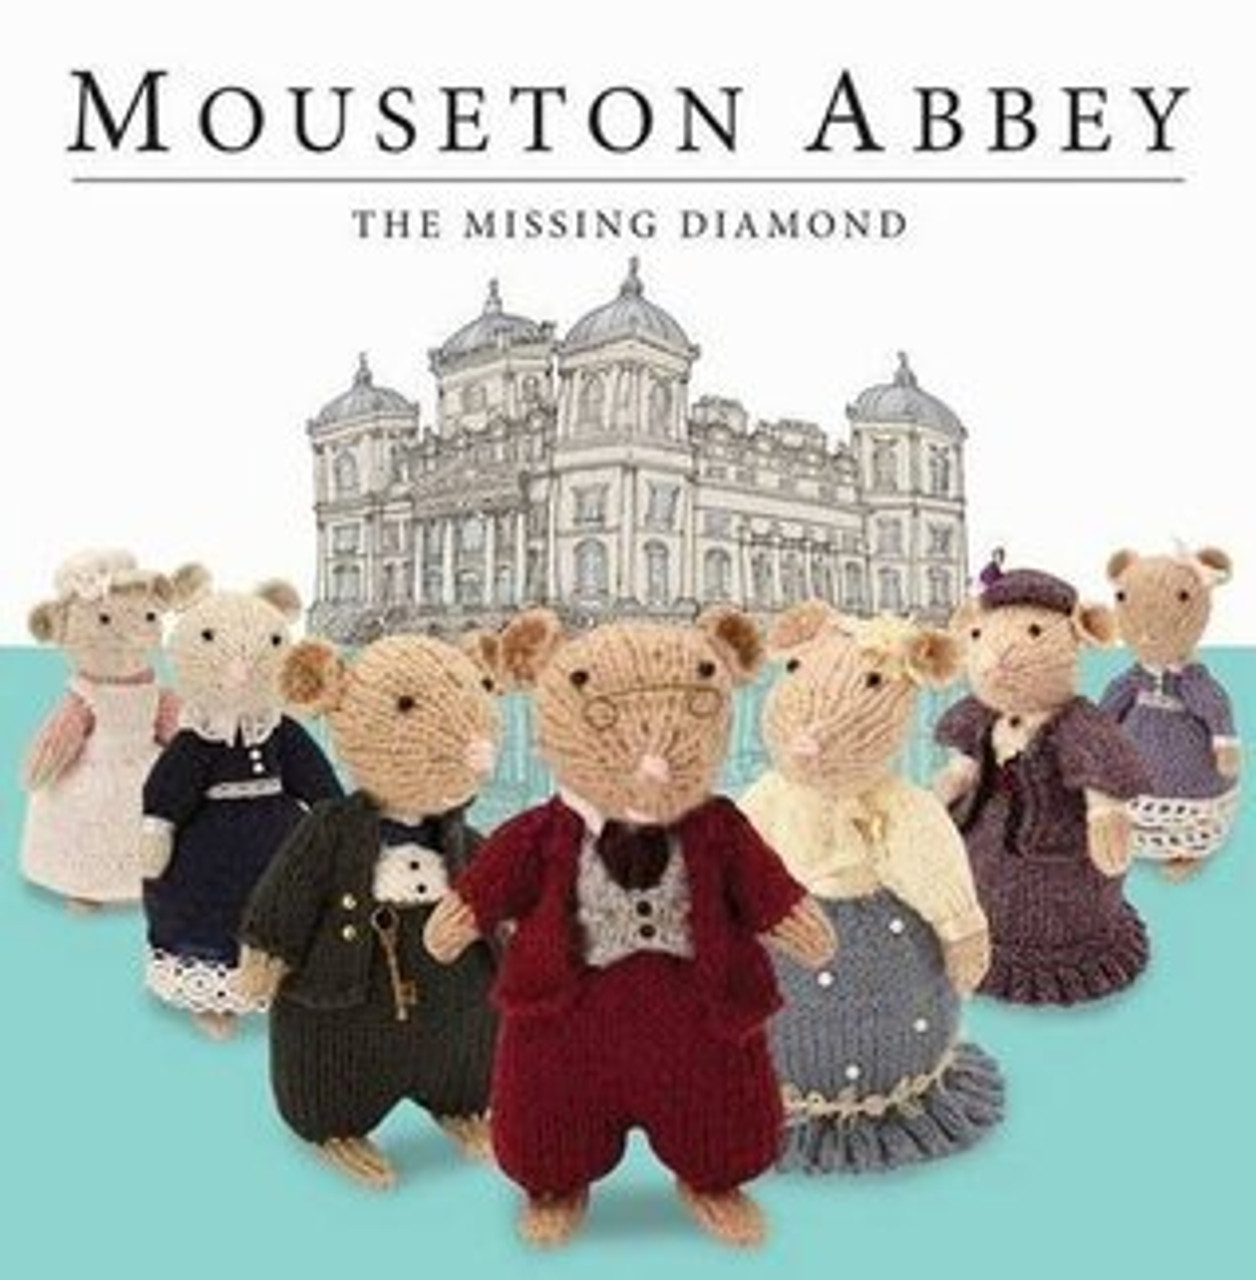 Nick Page / Mouseton Abbey: The Missing Diamond (Children's Coffee Table book)